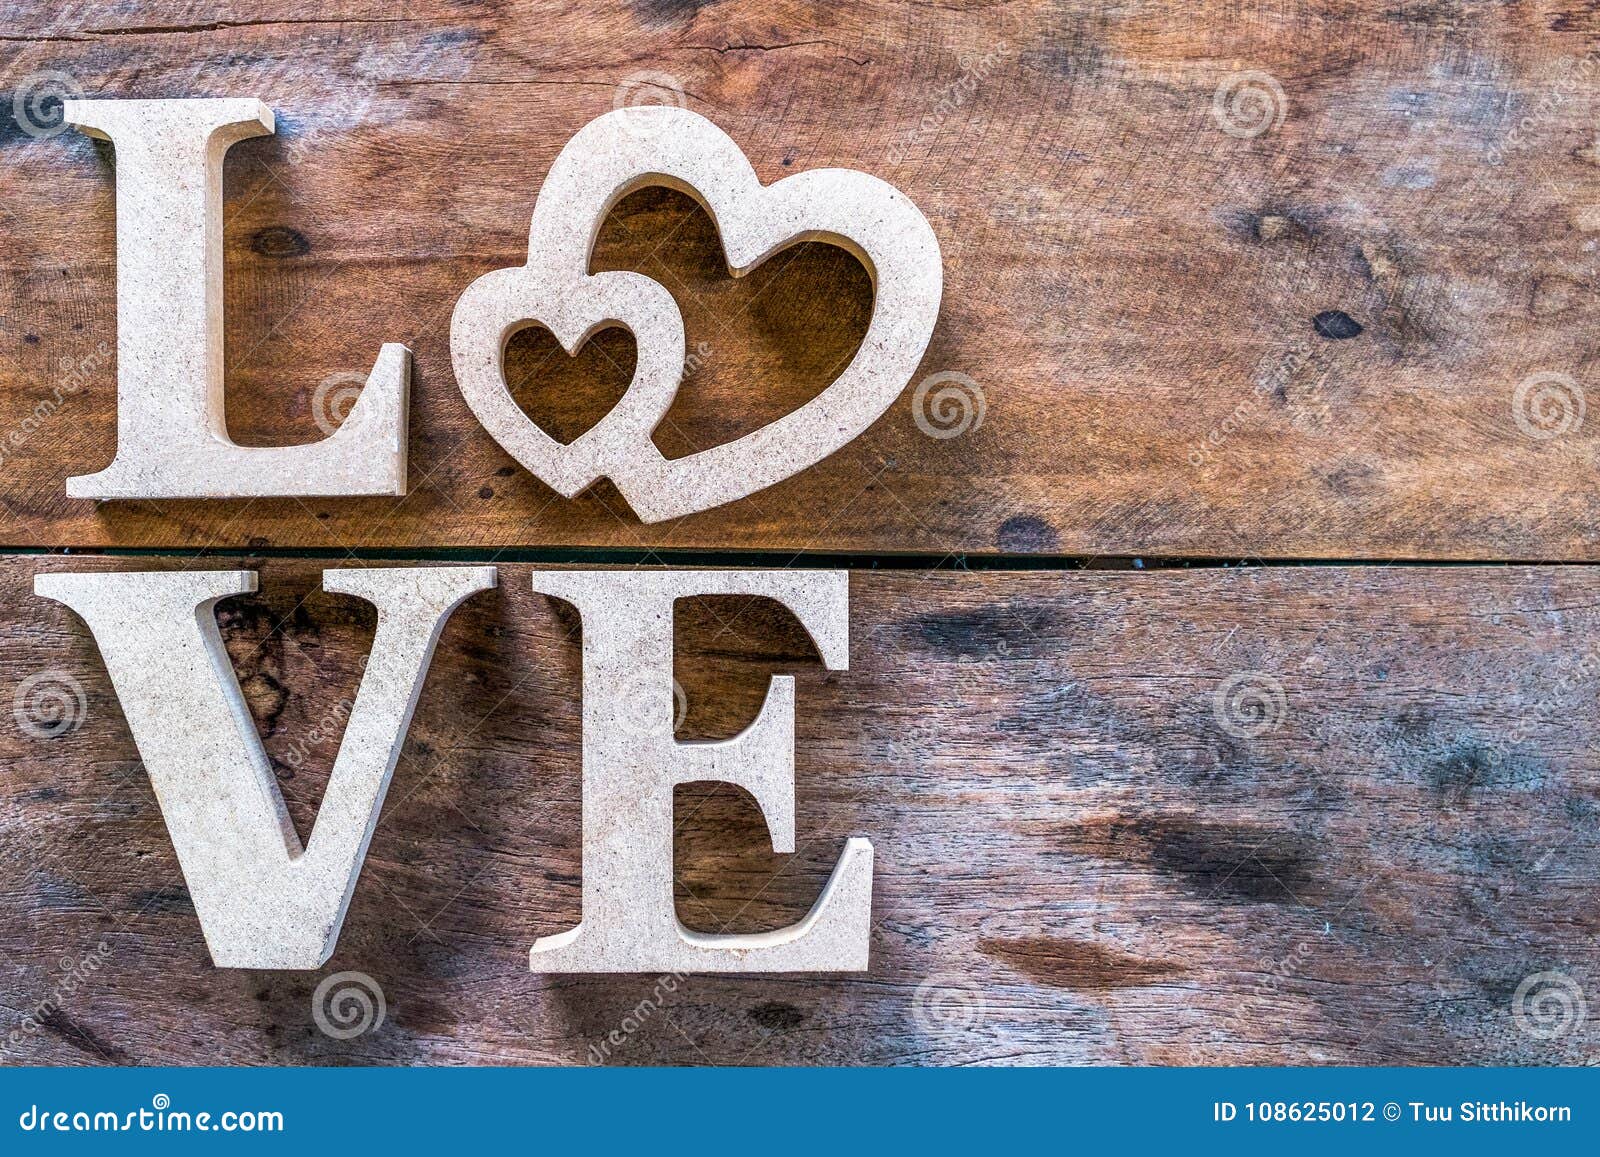 Love Letter Made from Wood on the Old Wooden Floor Stock Photo - Image ...